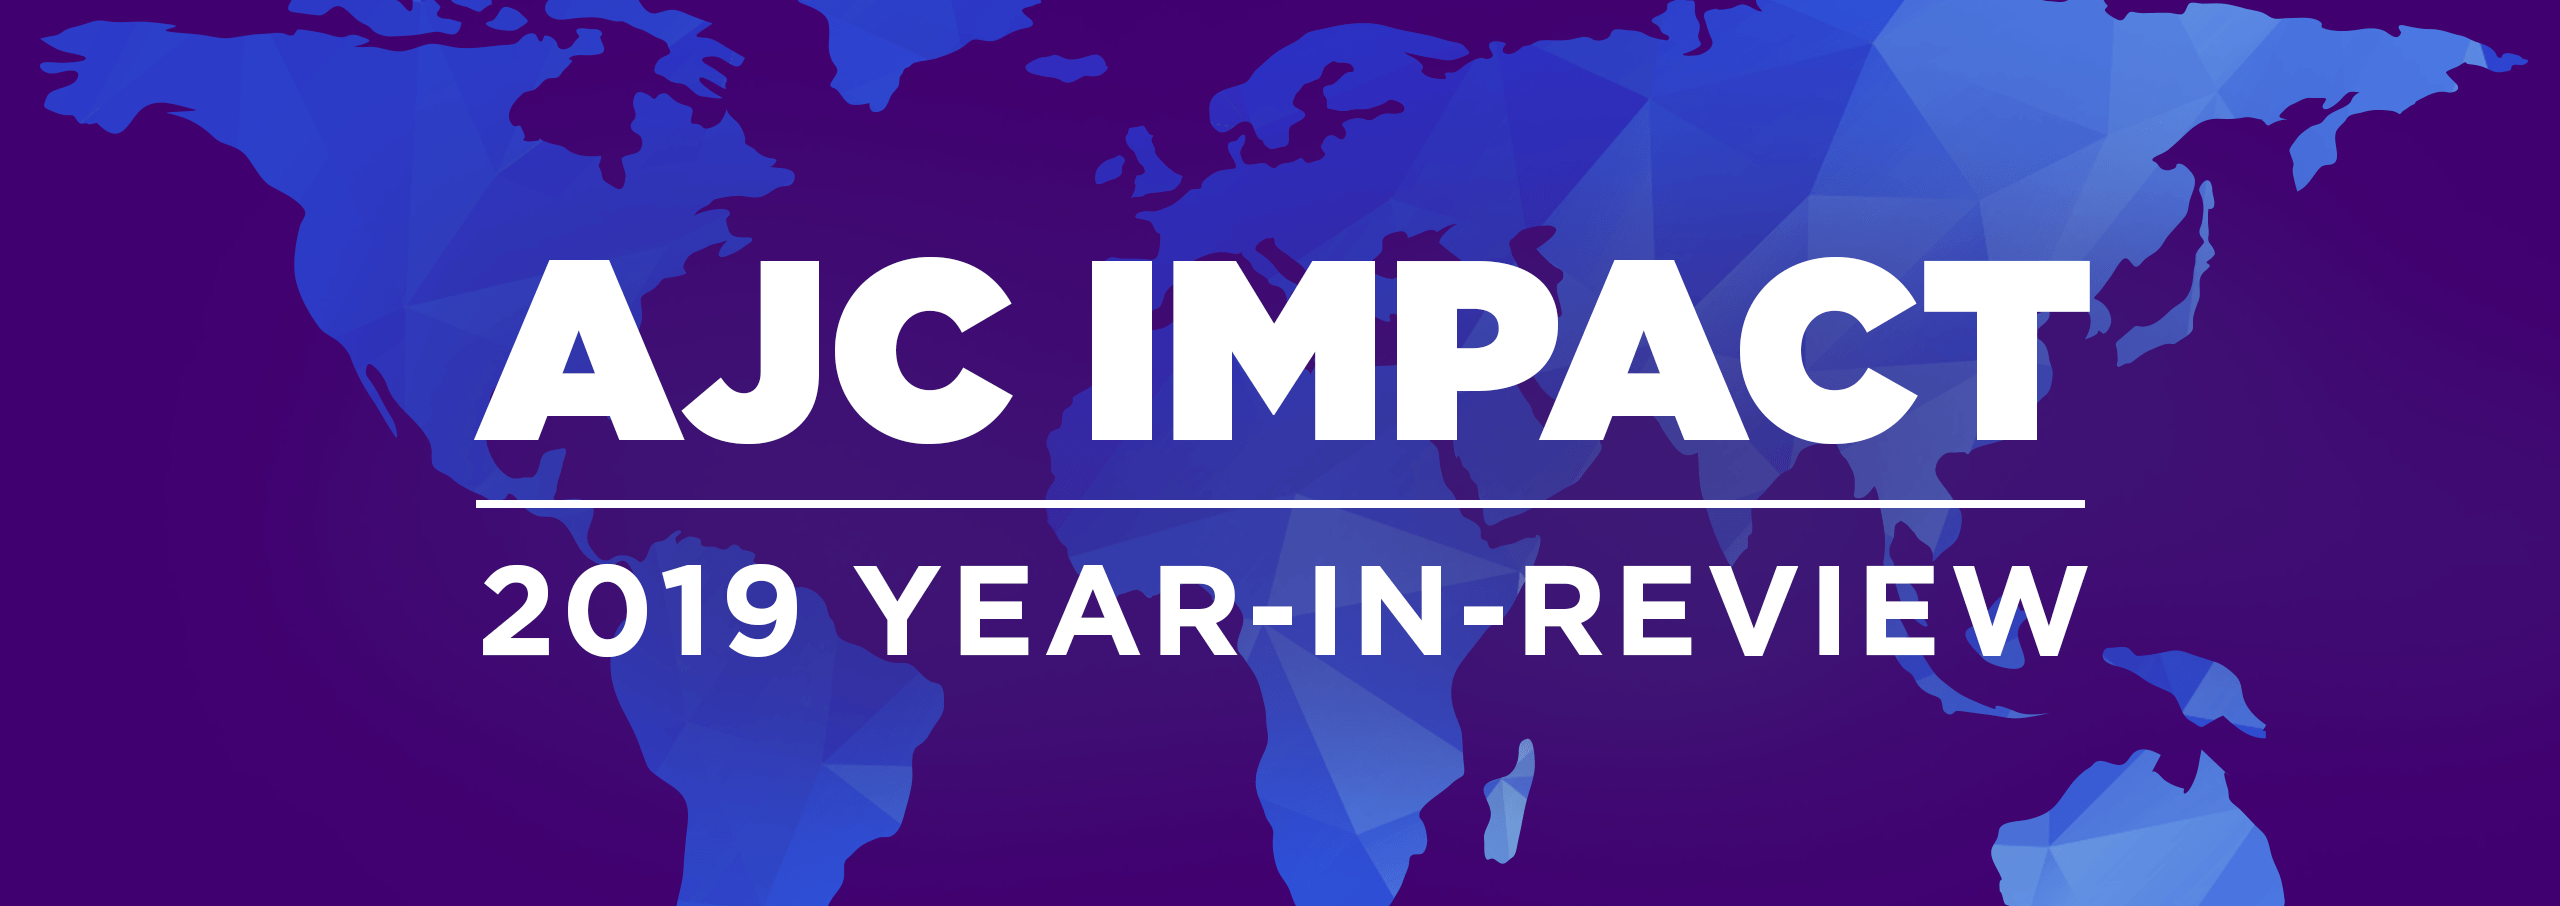 AJC IMPACT | 2019 Year-In-Review